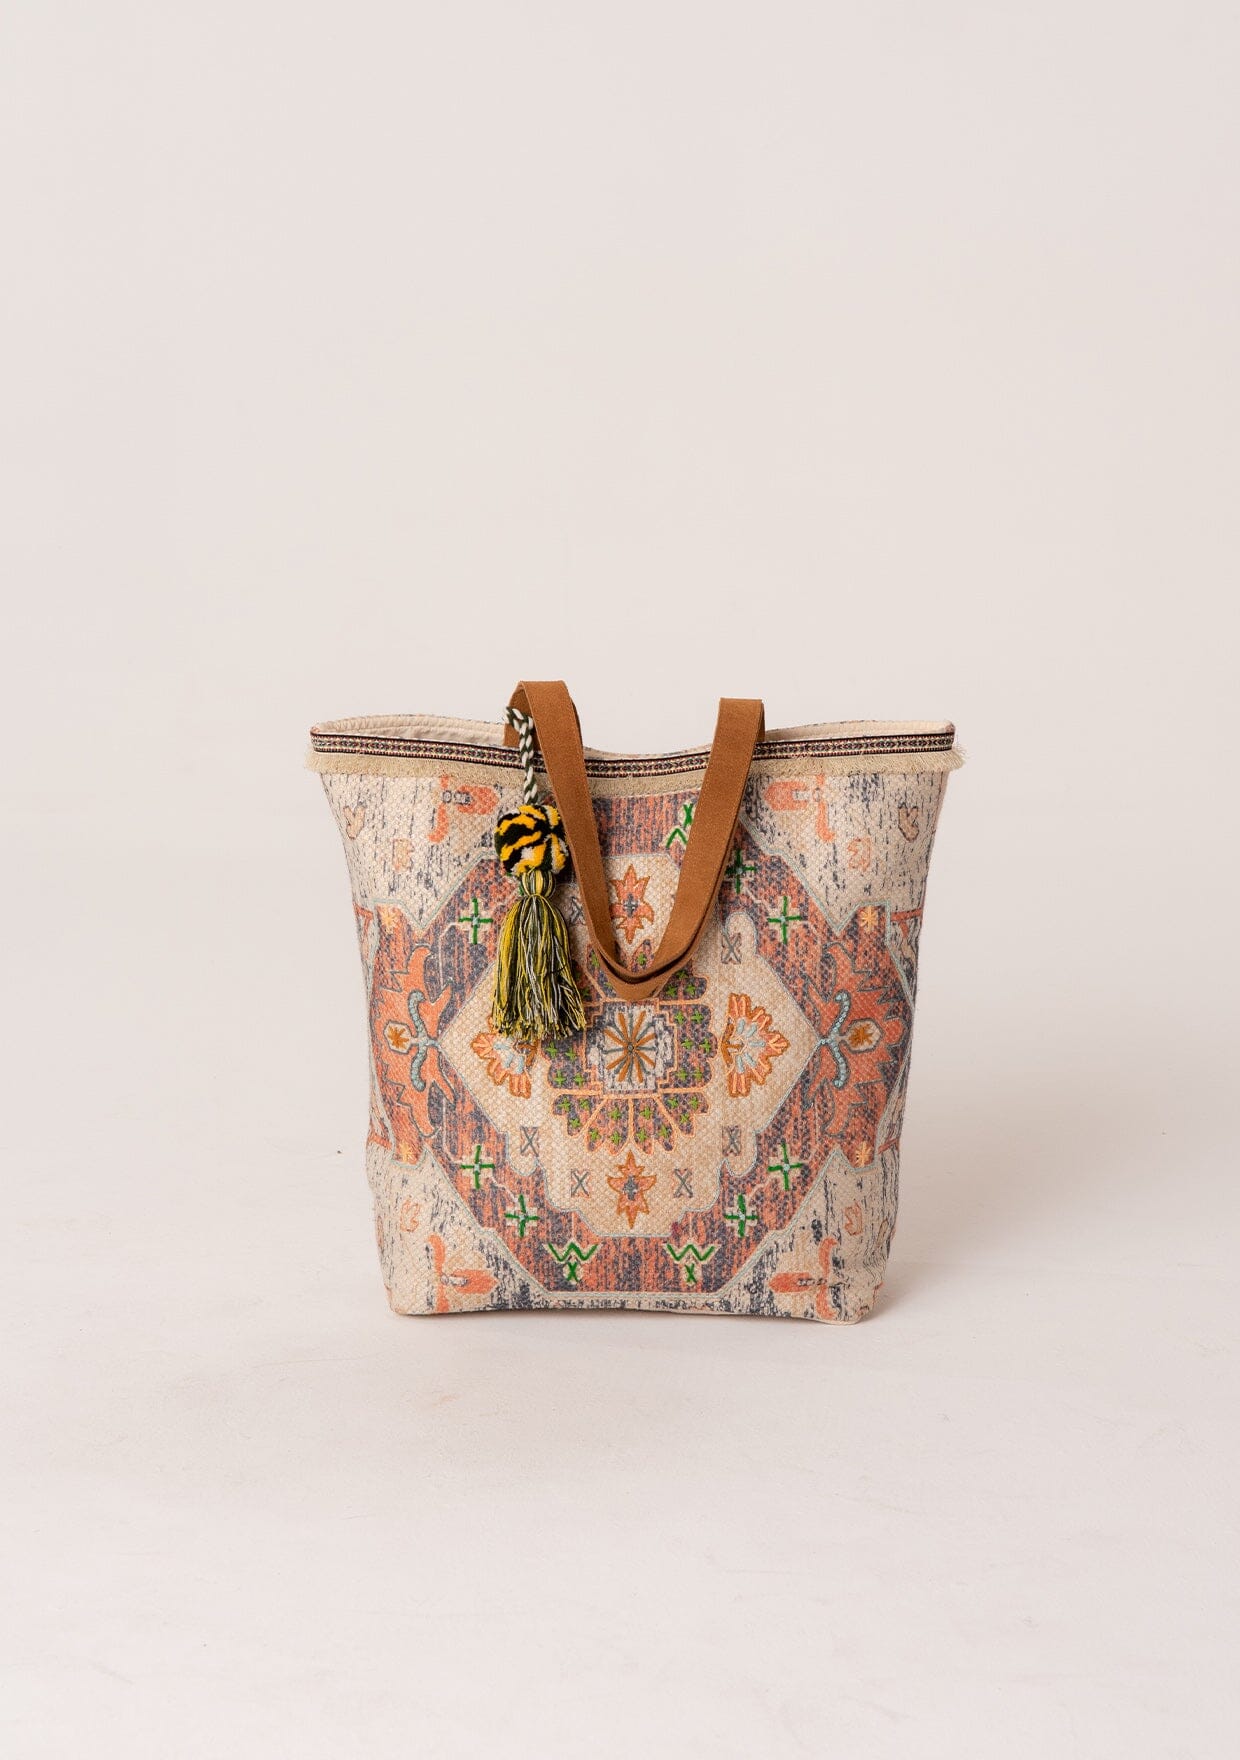 Shop All Of The Latest Bohemian Style Shoulder Bags And Totes